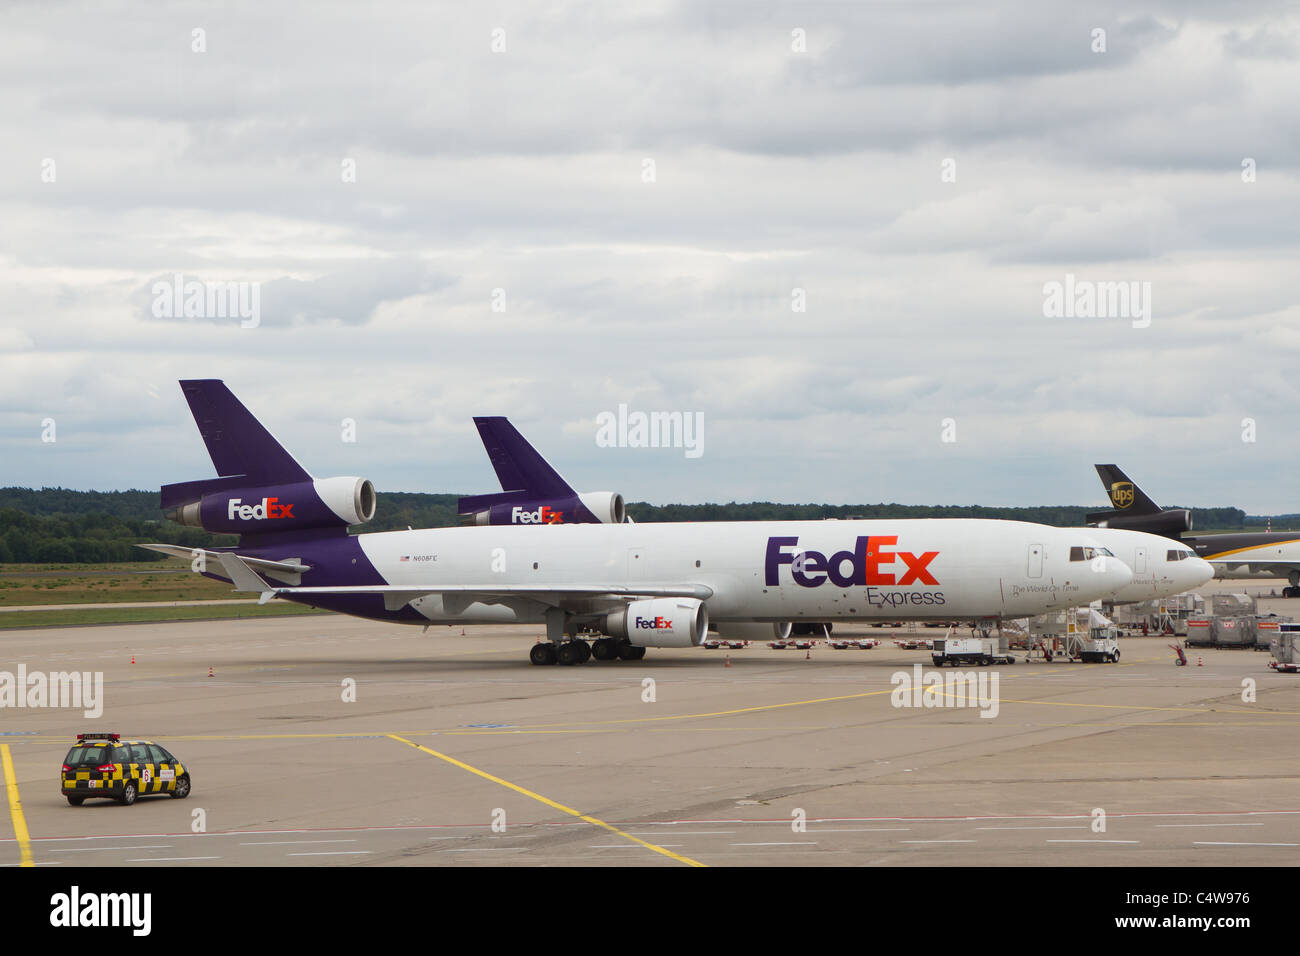 COLOGNE - JUNE 13:Fedex McDonnell Douglas DC-10 airplane located in Cologne airport, Germany on June 23, 2011. Stock Photo